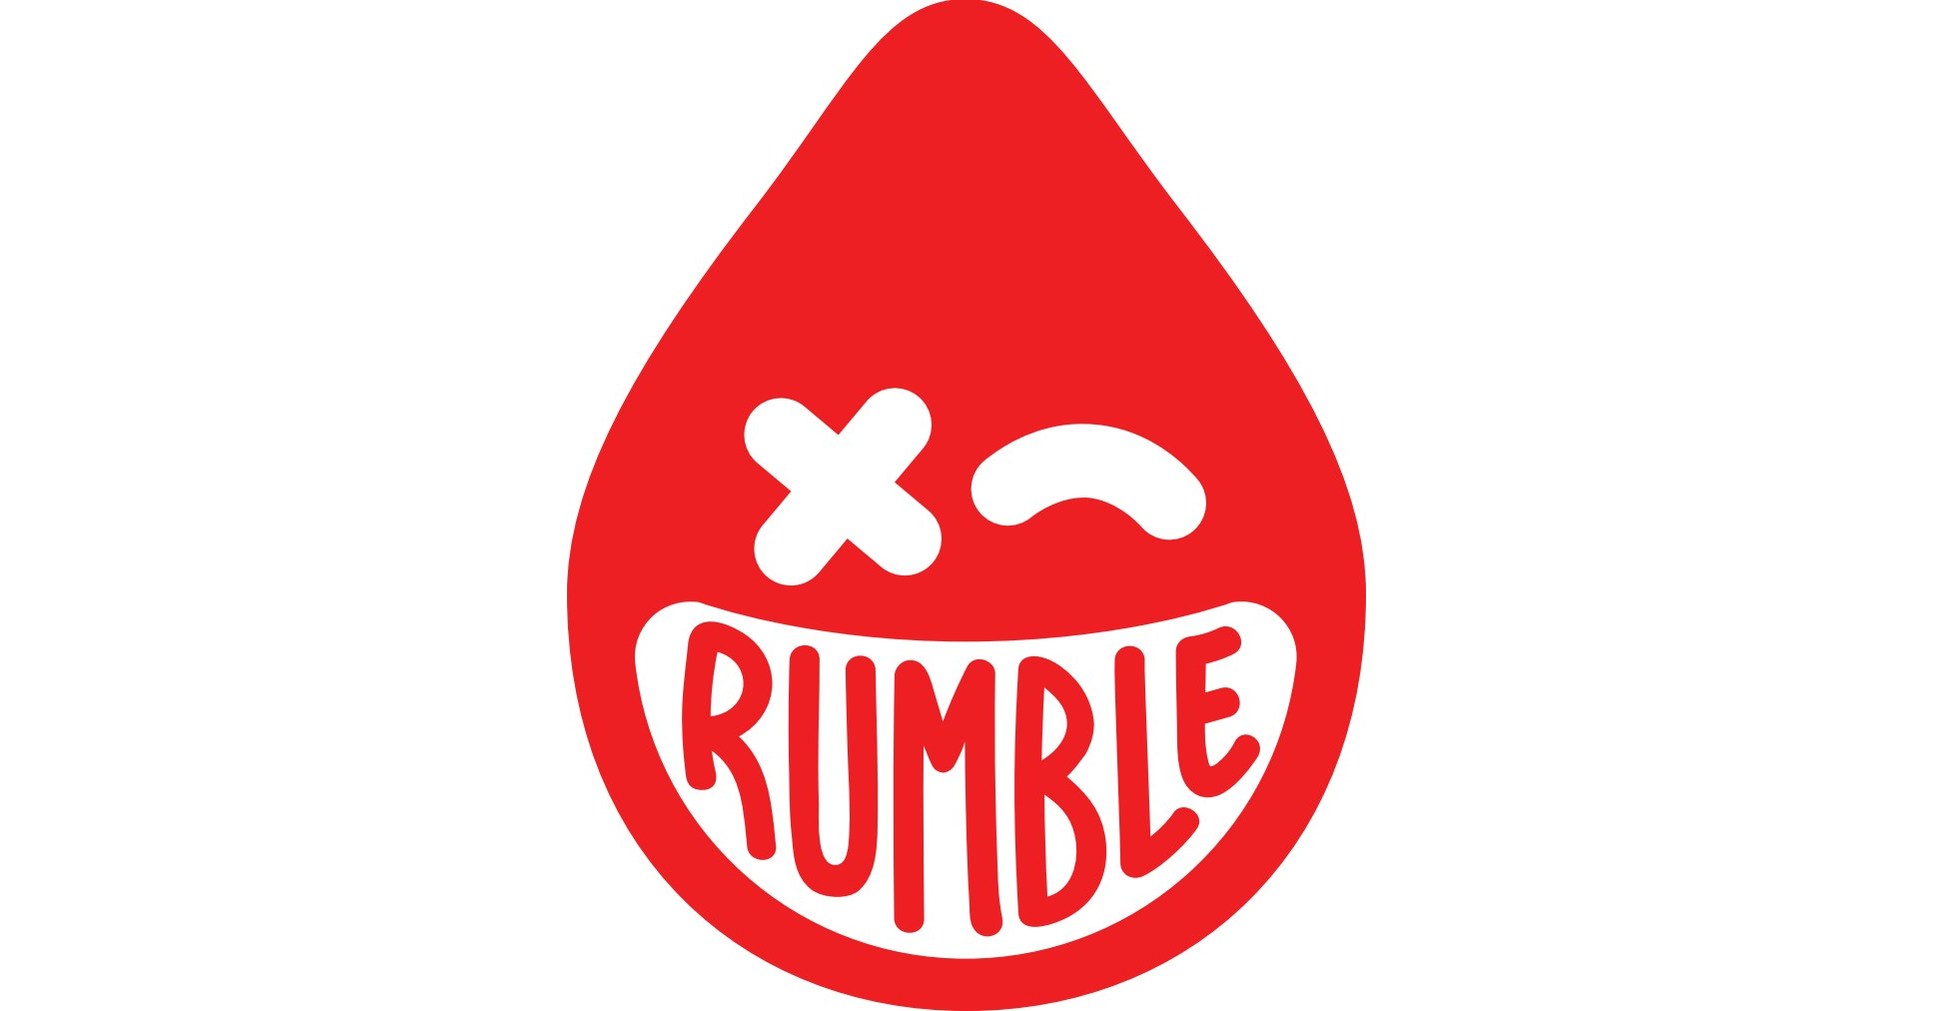 Rumble on Oct 21st at 6:30pm ET